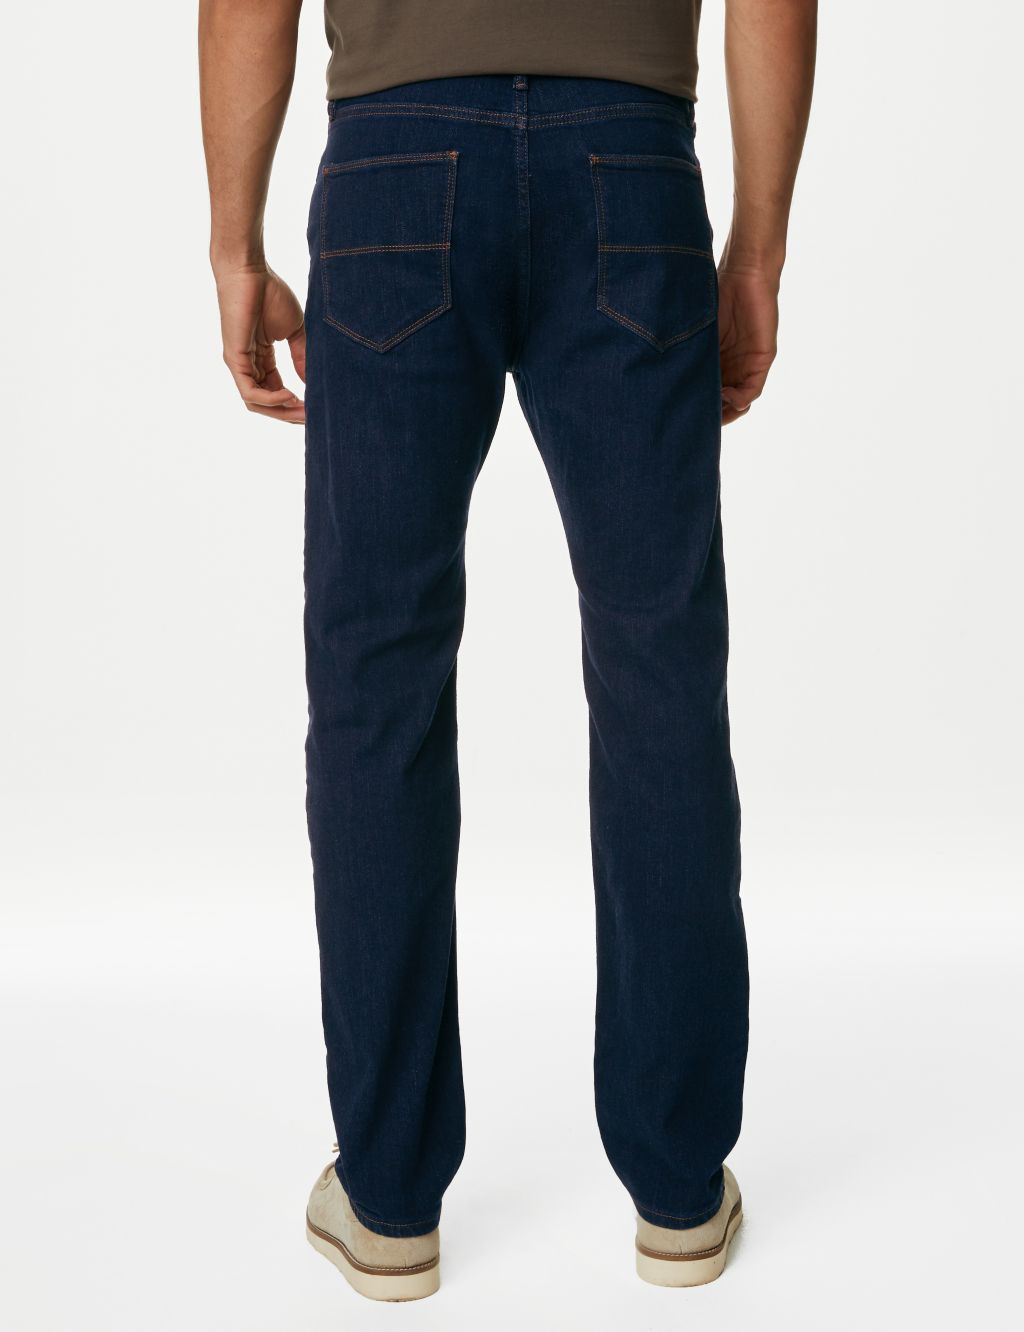 Straight Fit Stretch Jeans image 5